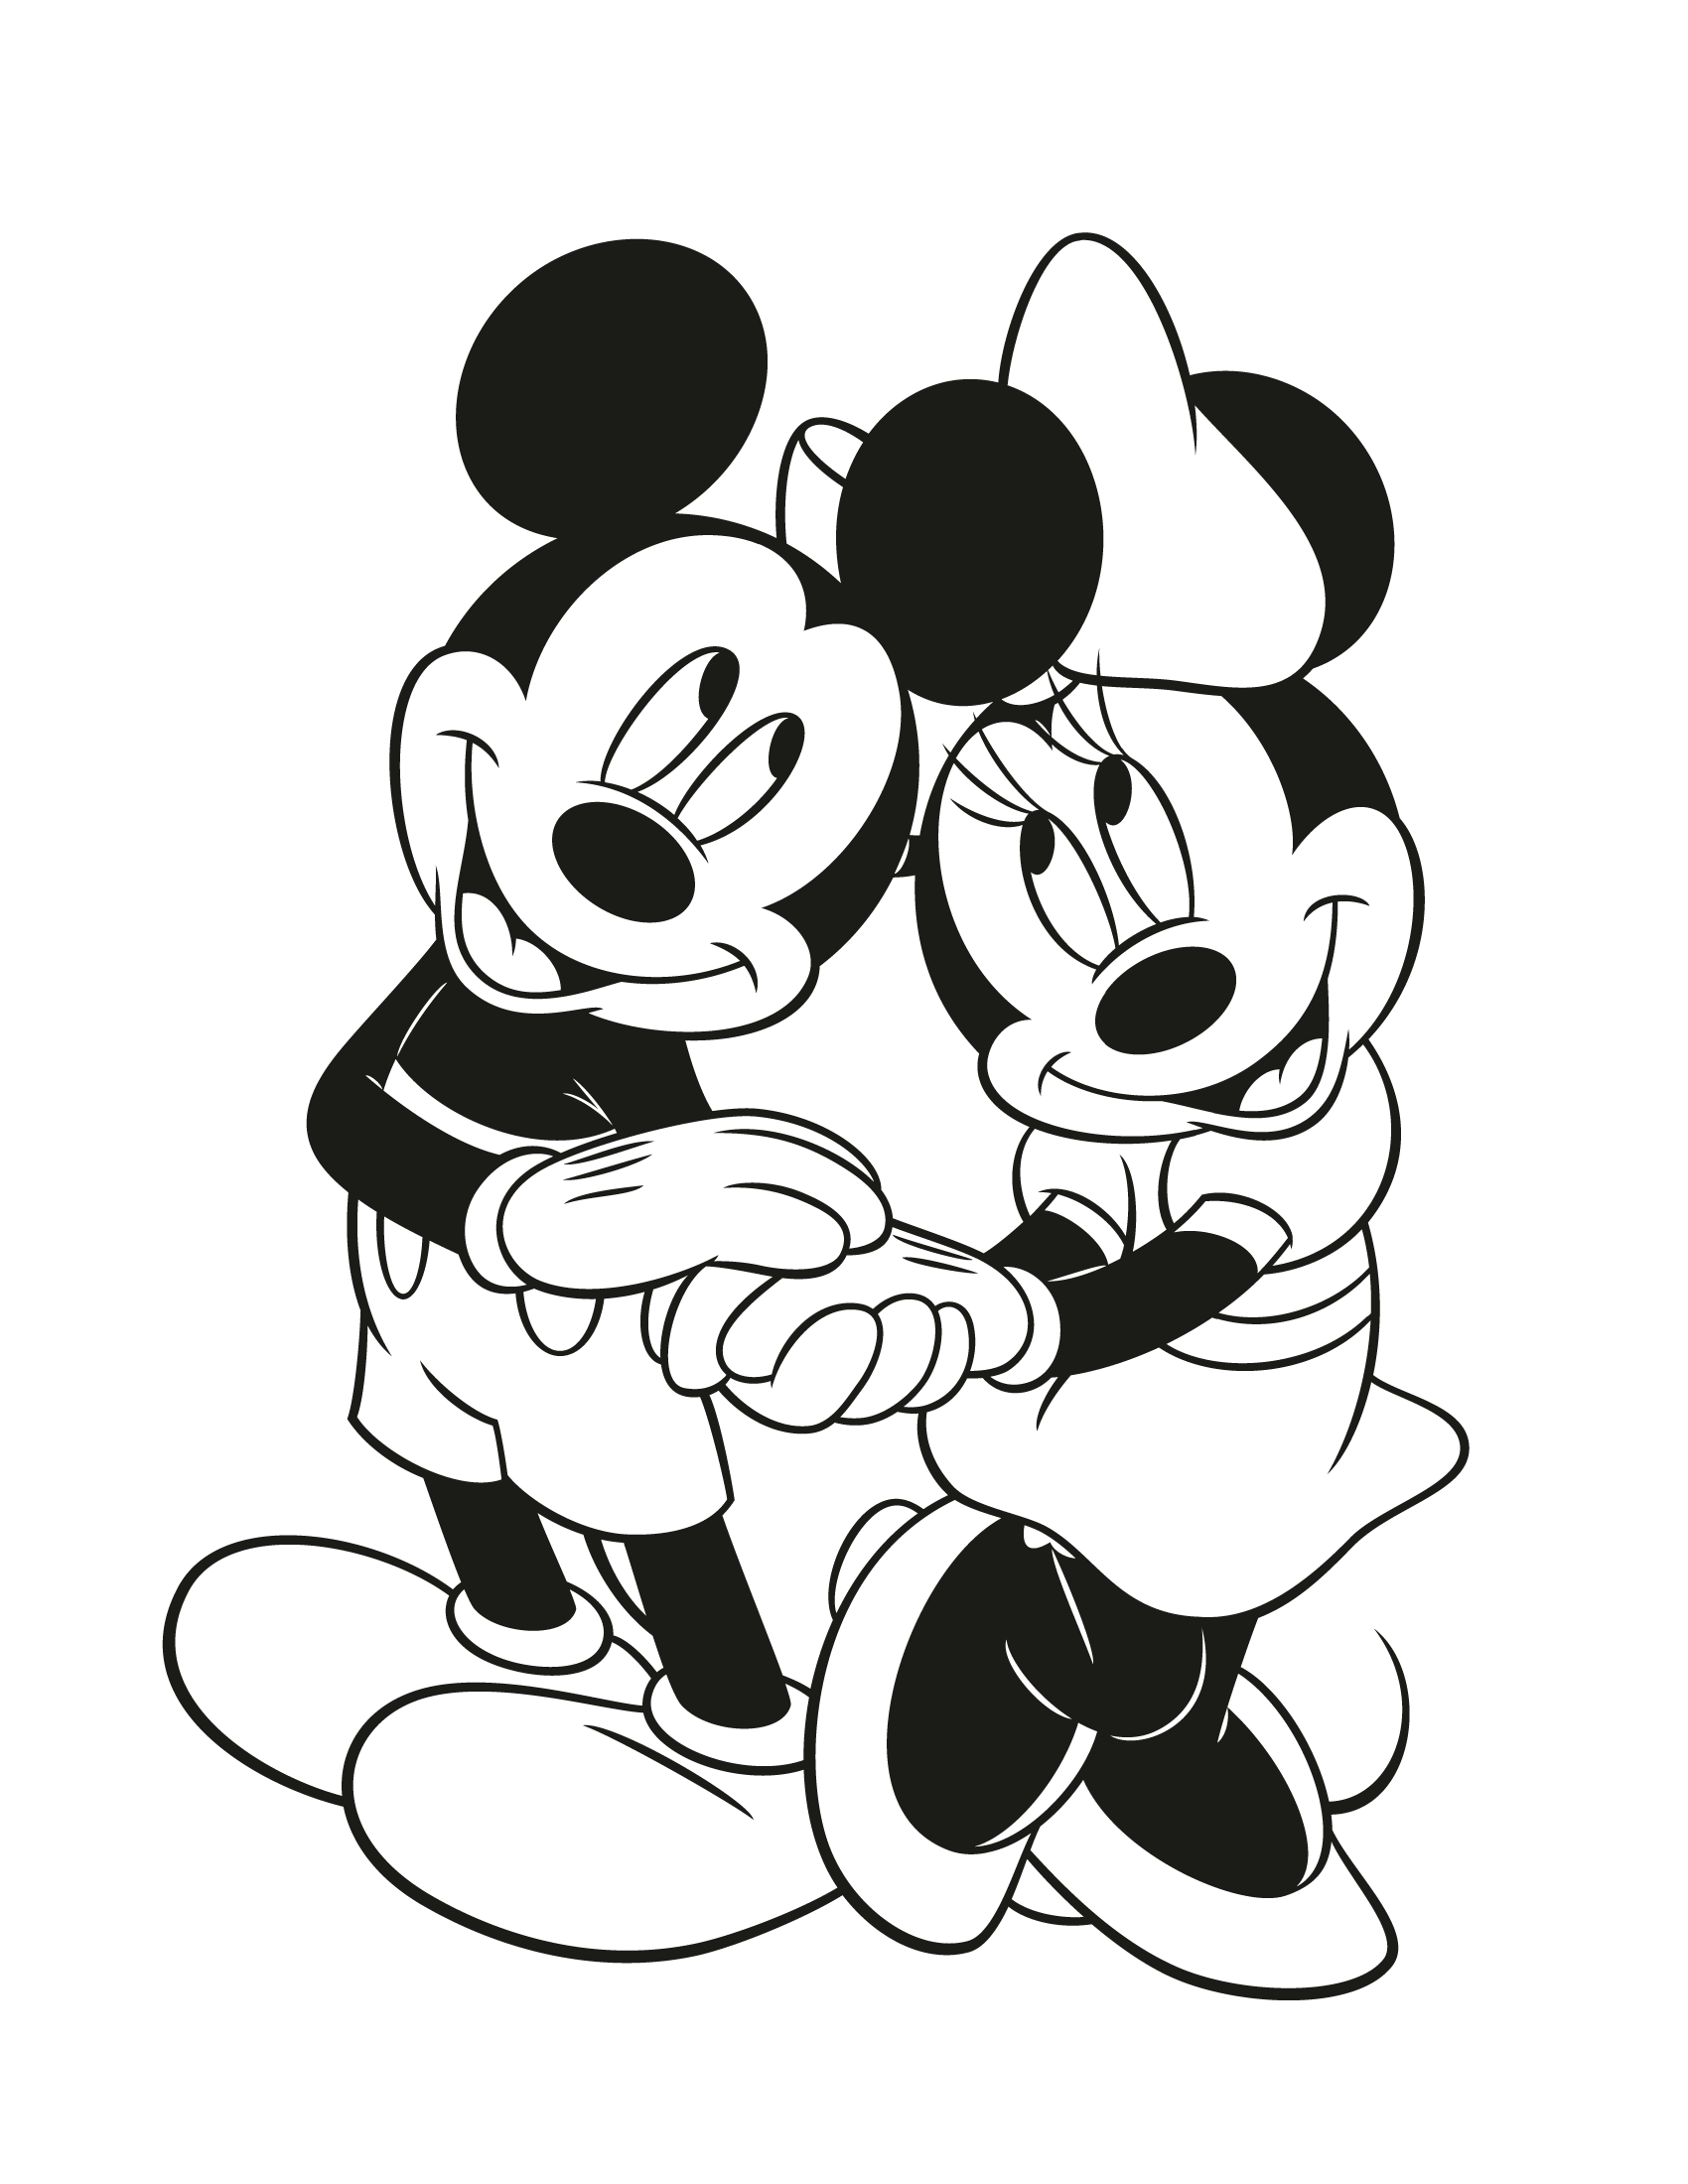 Mickey Mouse Coloring Pages 2 - coloringpages.cc